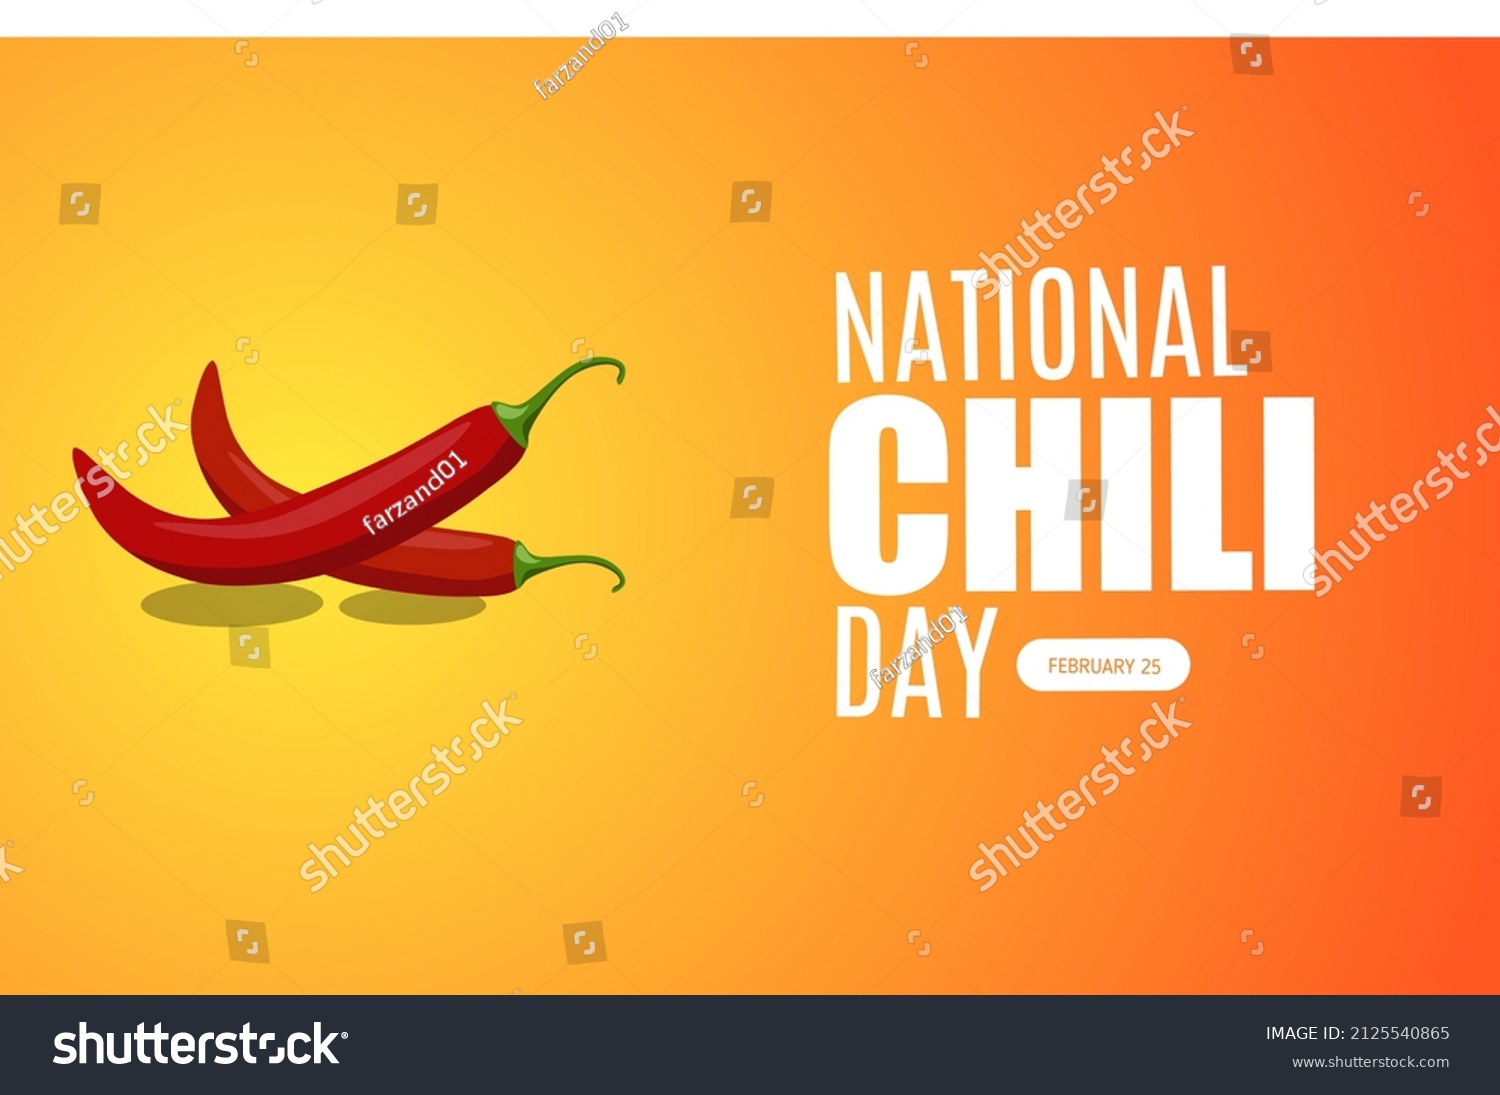 National Chili Day February 25 Vector Stock Vector (Royalty Free